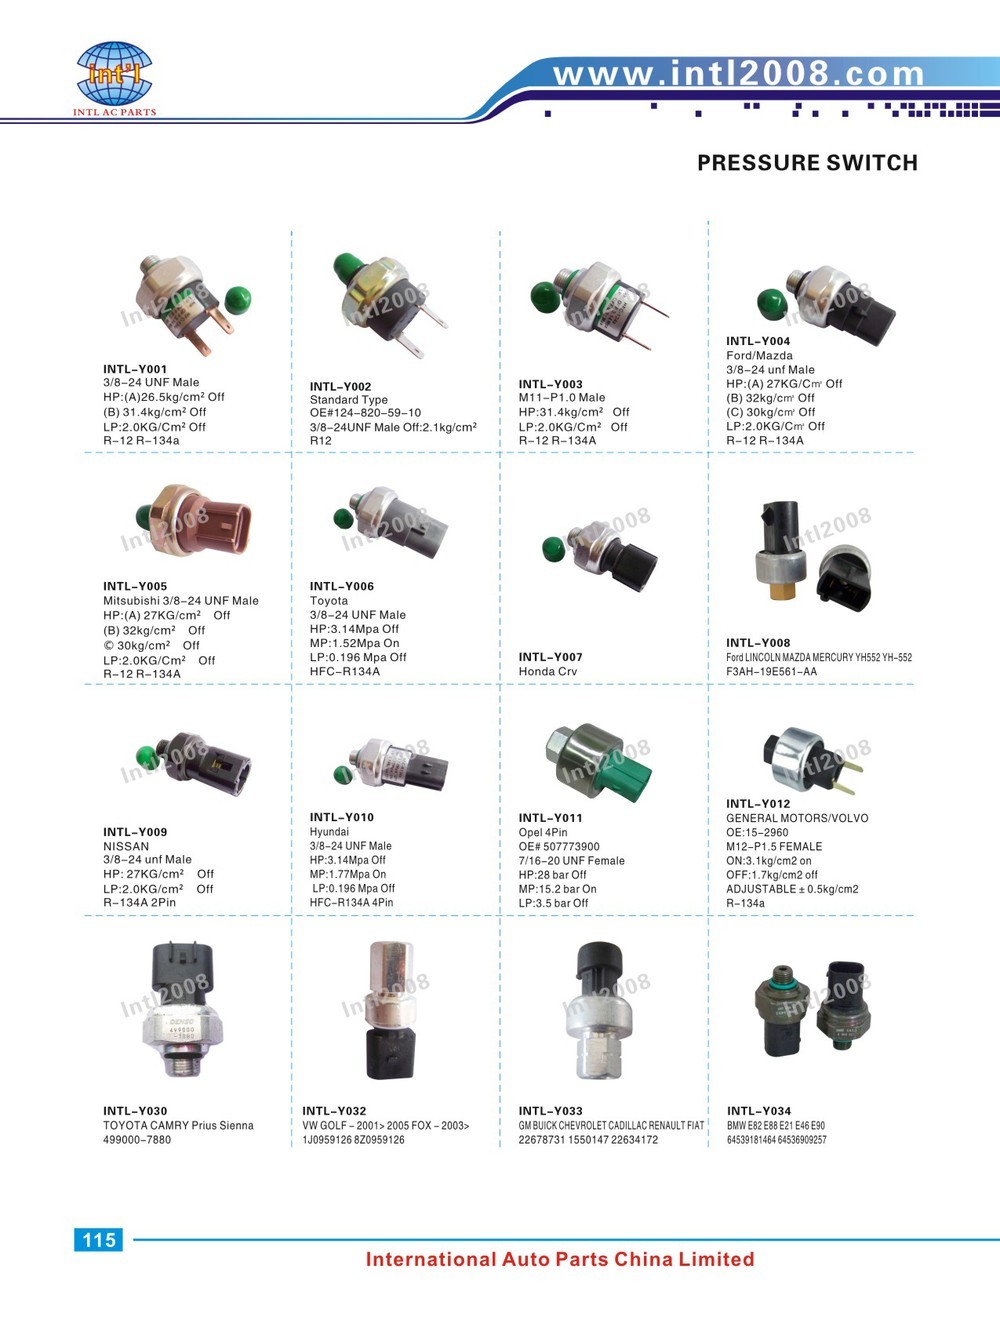 Pressure Switches 3pin A/C Pressure Sensor Air Conditioning Transducer Switch 3pin